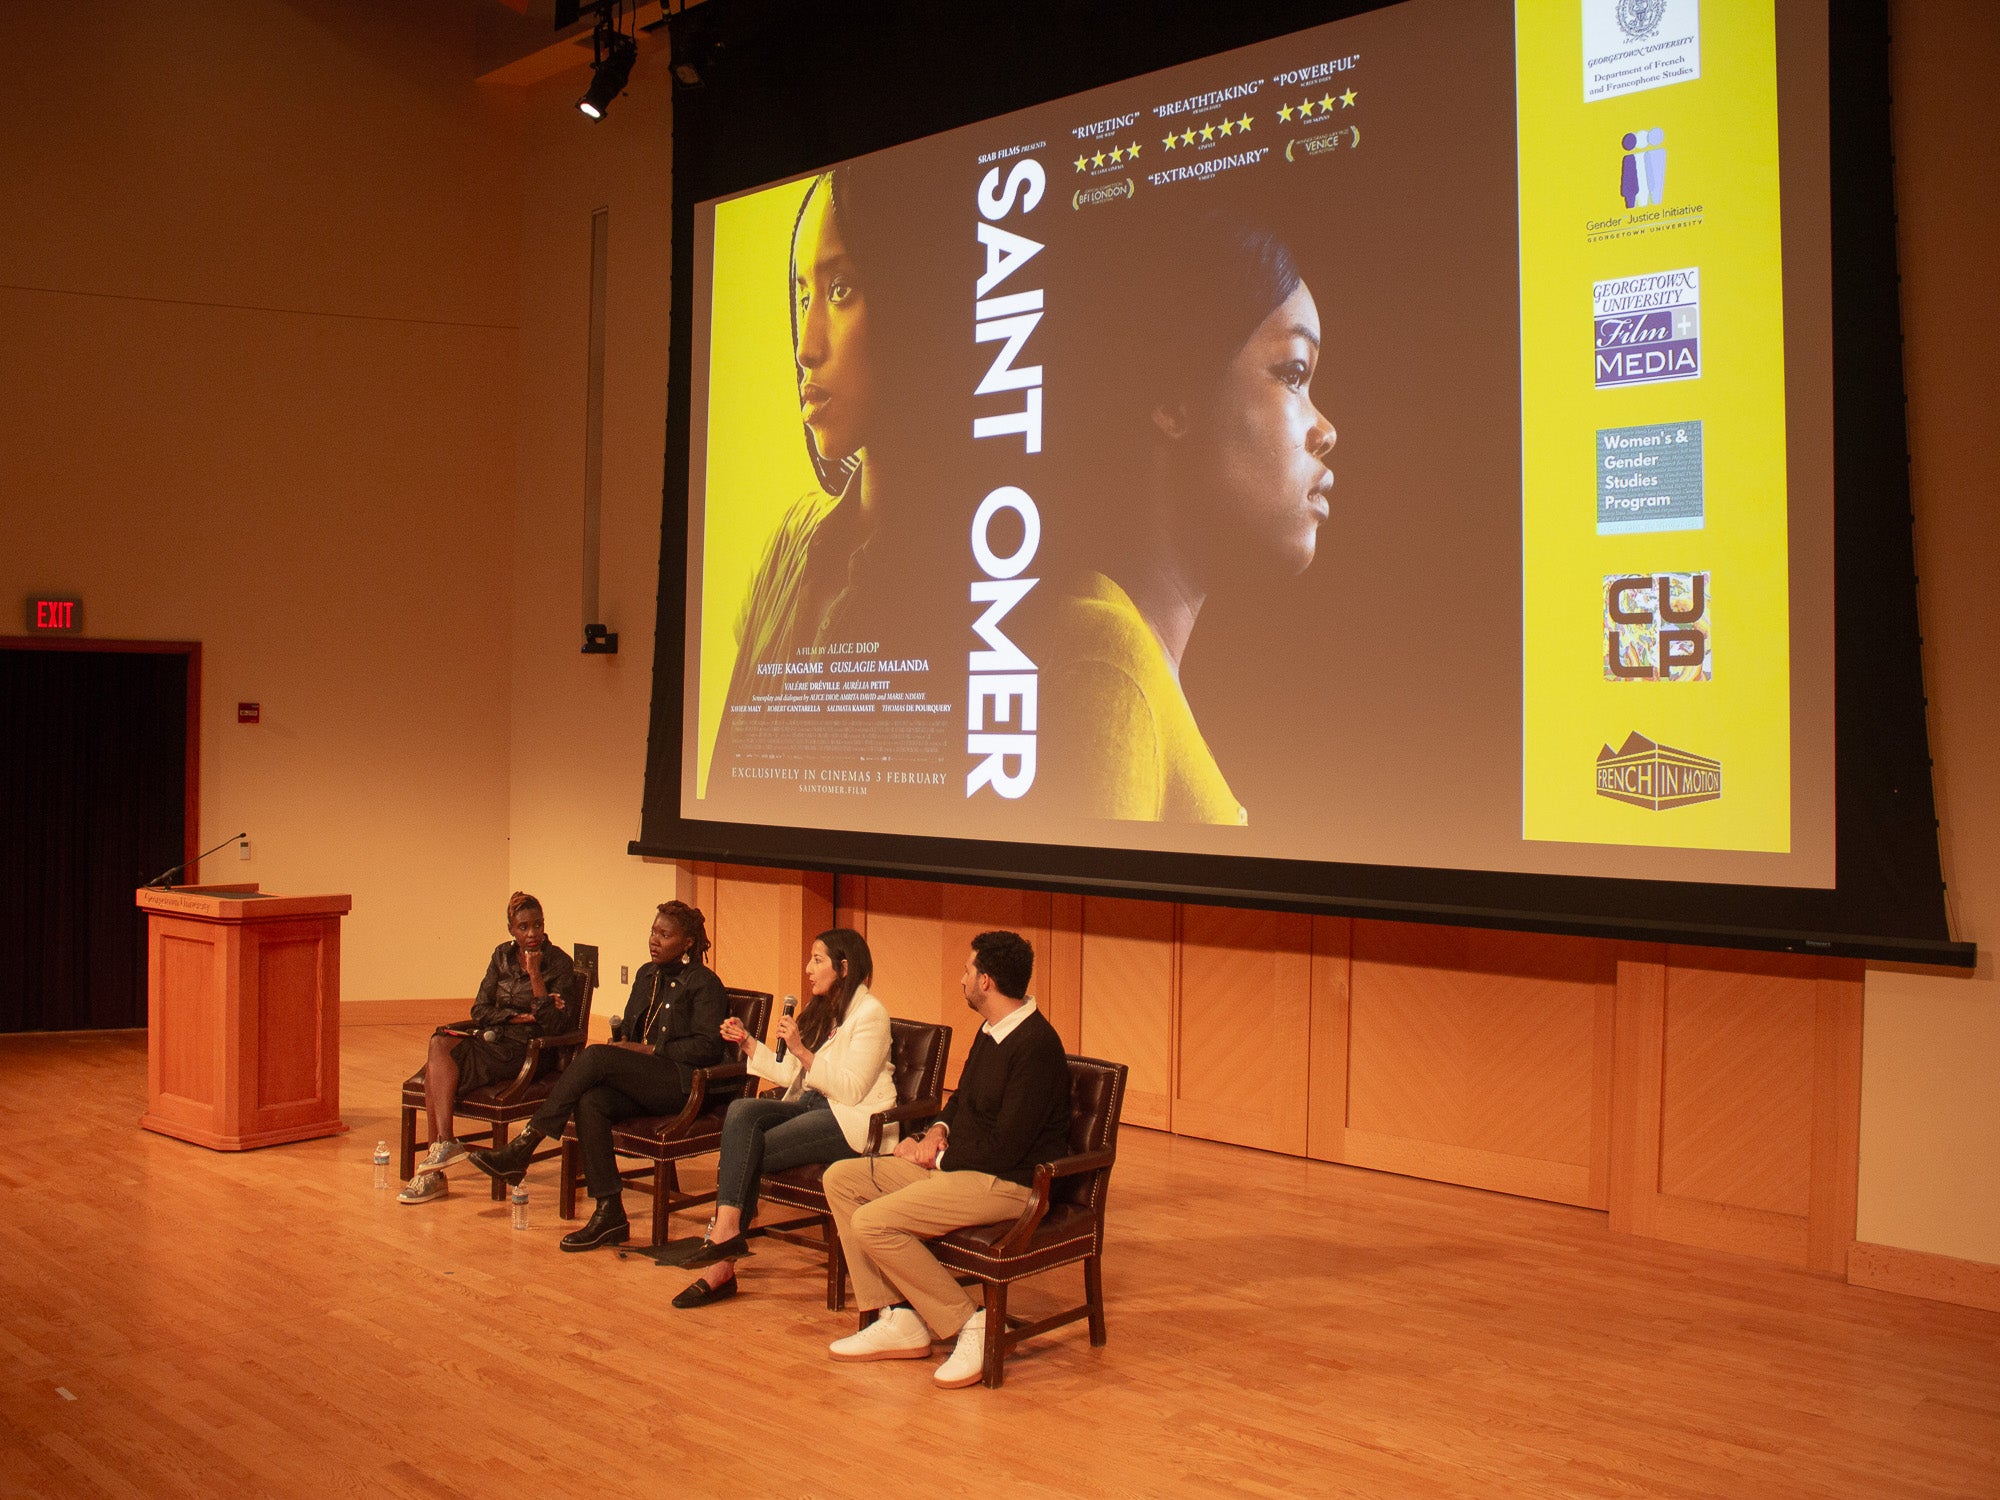 Four people are seated on a stage during the Q+A portion of the screening. From left to right: Rokhaya Diallo (a French-Senegalese woman), Alice Diop (a French-Senegalese woman), Melyssa Haffaf (a French-Algerian woman) and Leonard Cortana (a French-Guadeloupean man) are pictured. Behind them is an image of the event flyer.